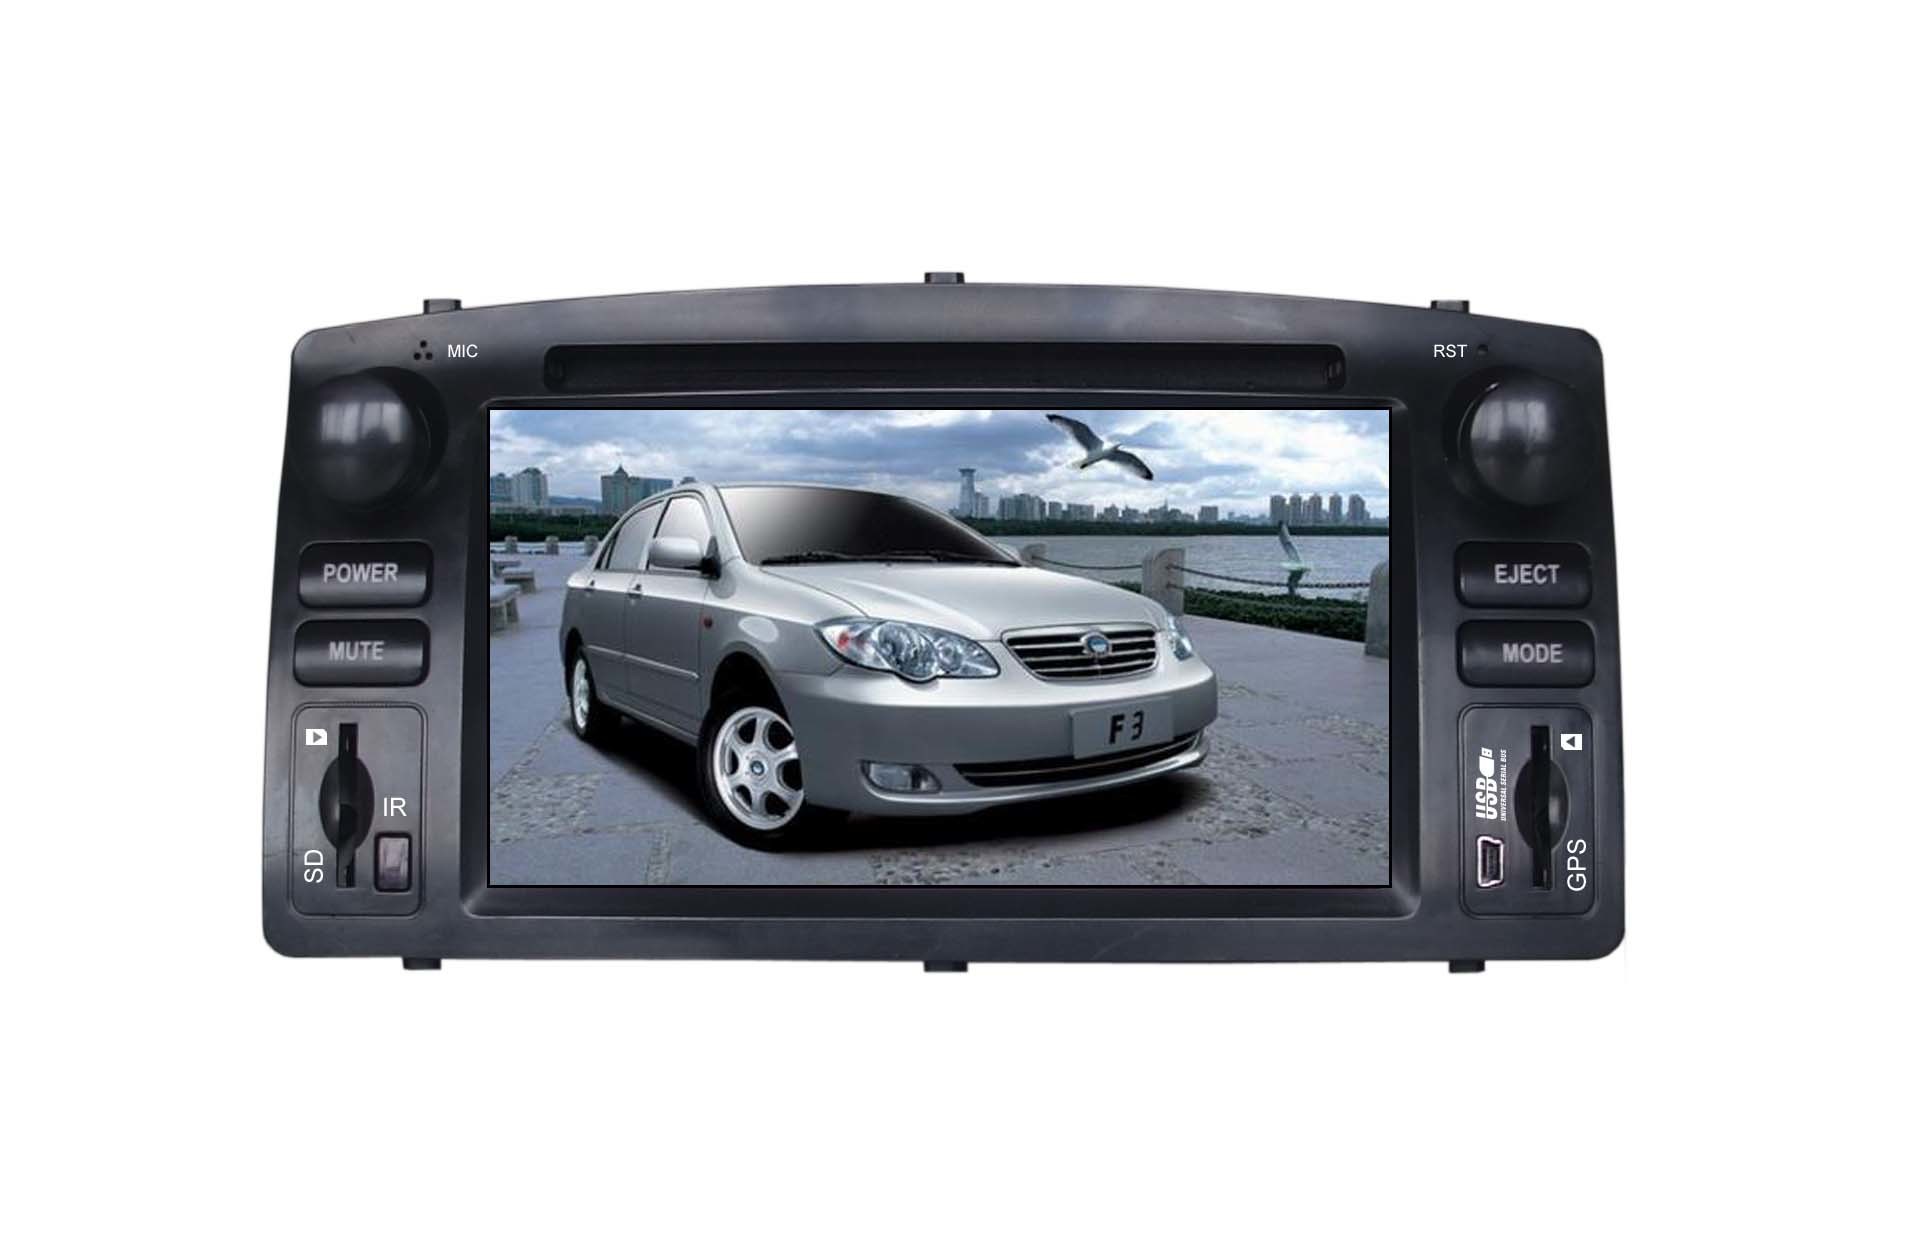 Yessun 6.2 Inch Car DVD Player for Byd F3 (TS6862)